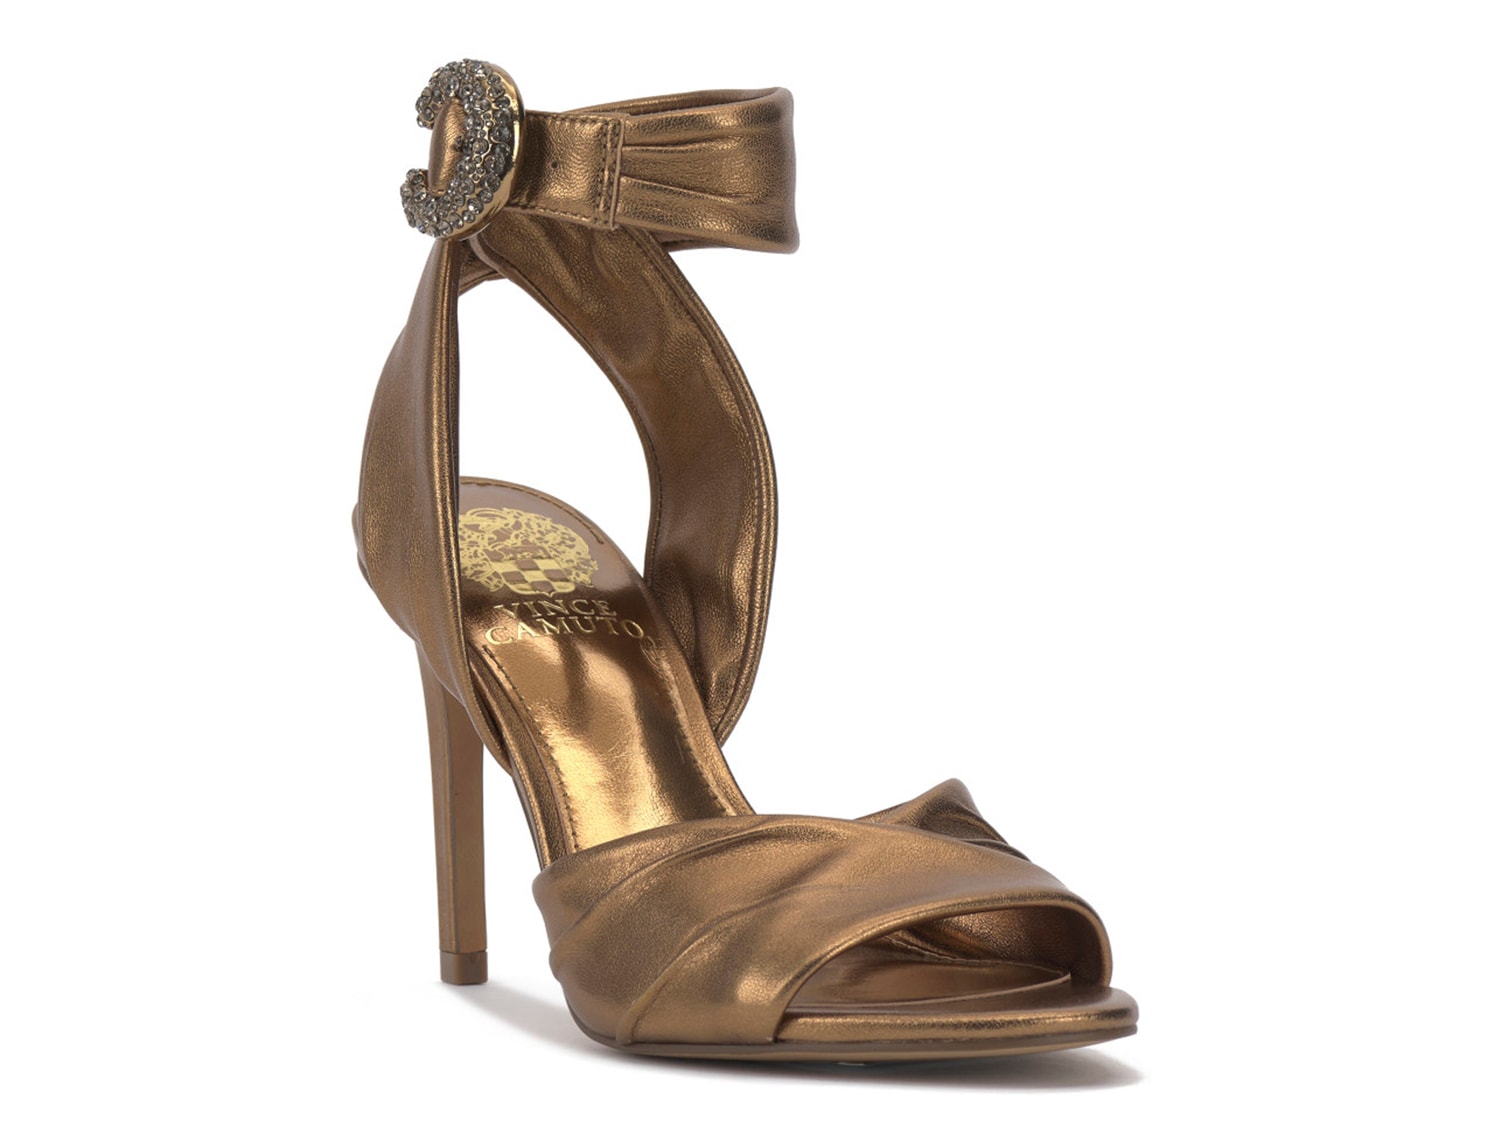 Vince Camuto Anyria Sandal - Free Shipping | DSW